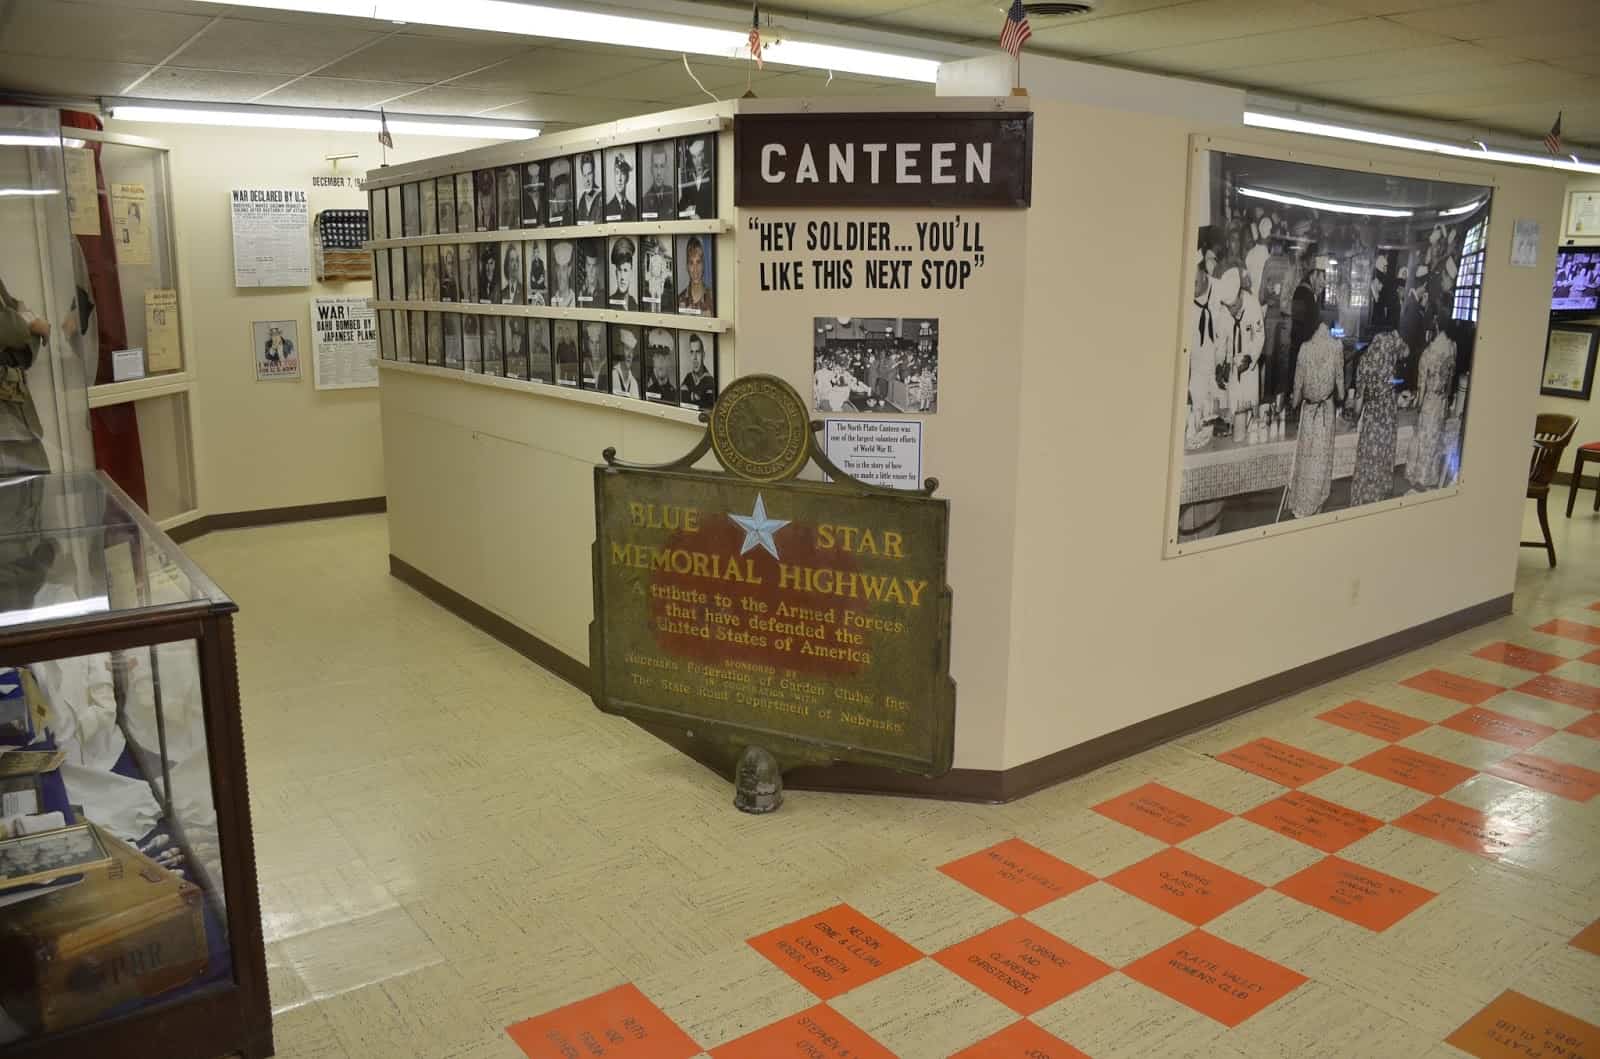 North Platte Canteen exhibit at Lincoln Country Historical Museum in North Platte, Nebraska